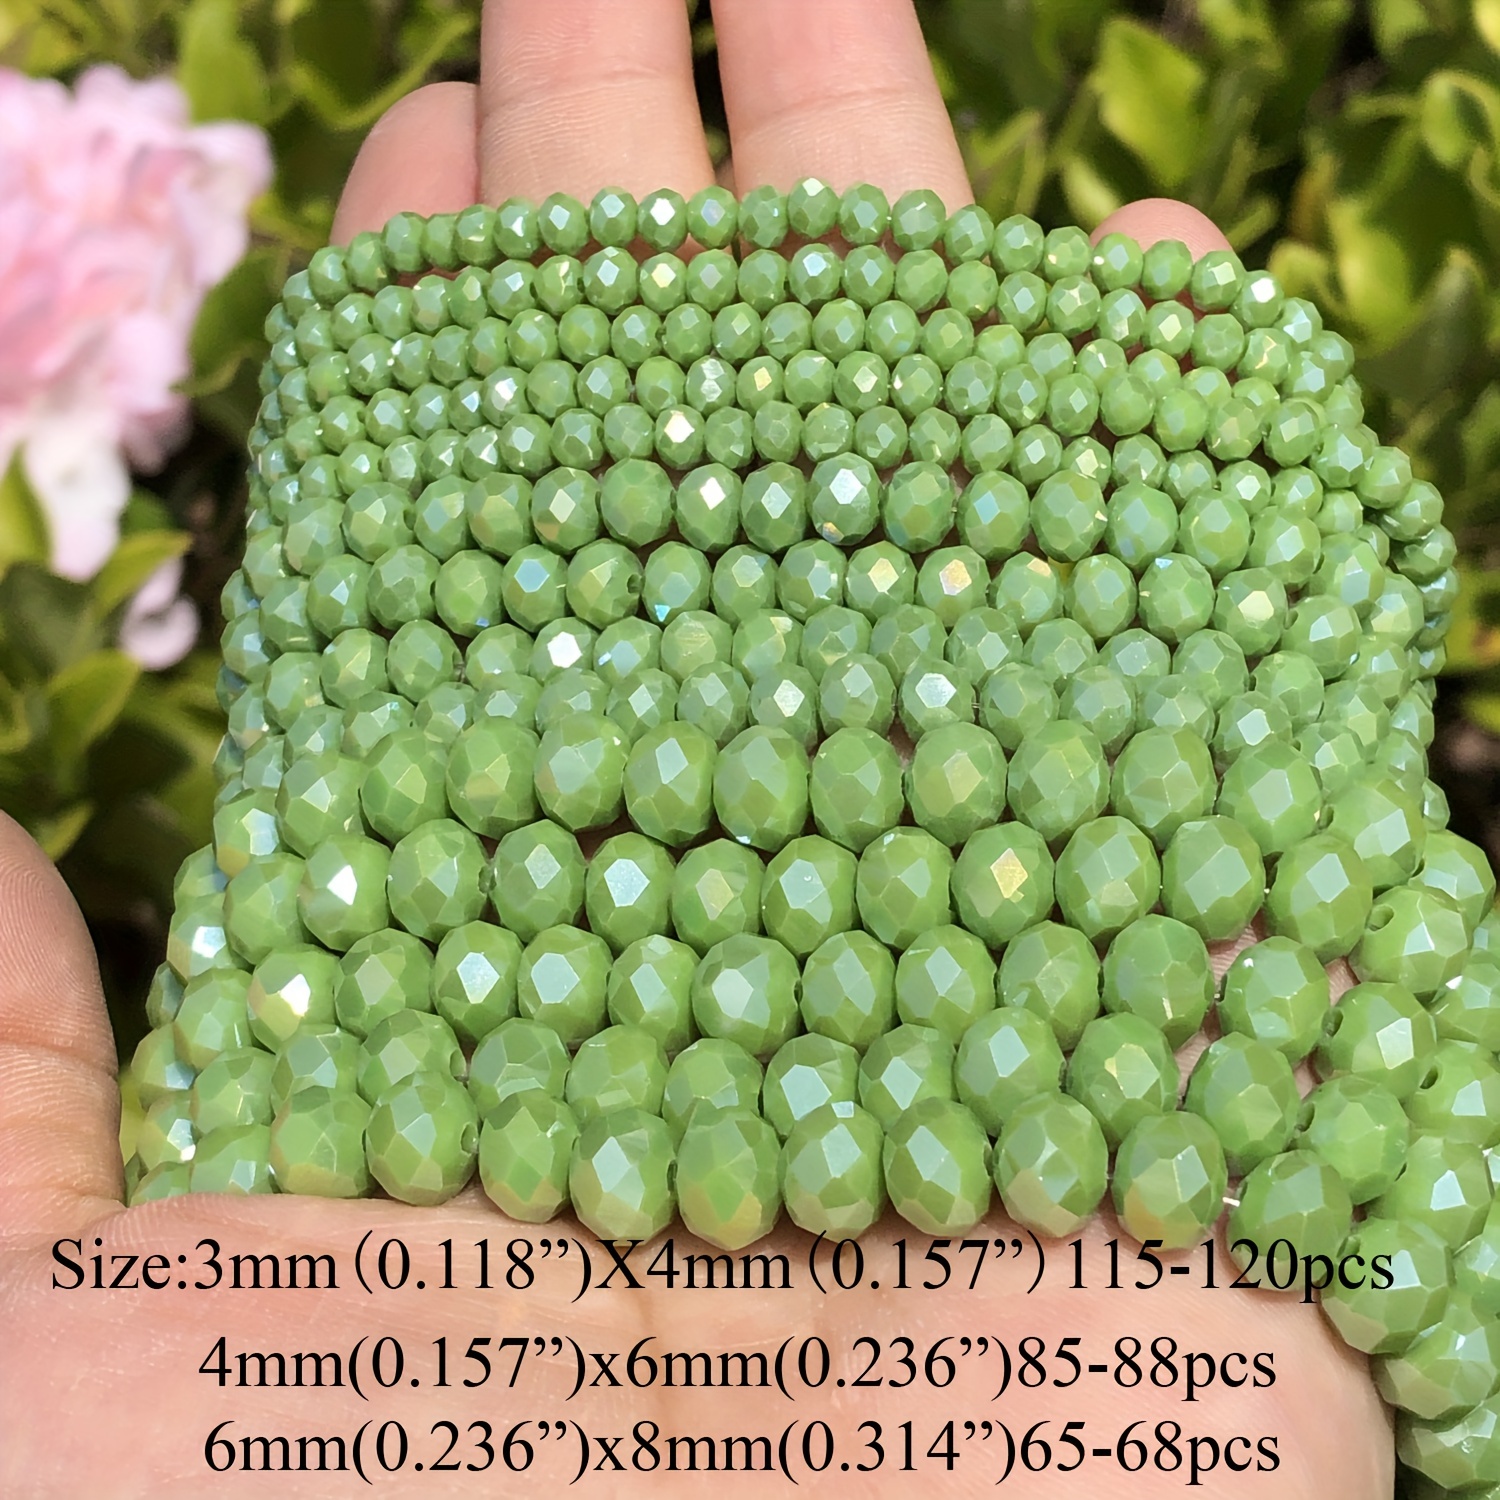 4mm Olive Green AB Faceted Glass Beads